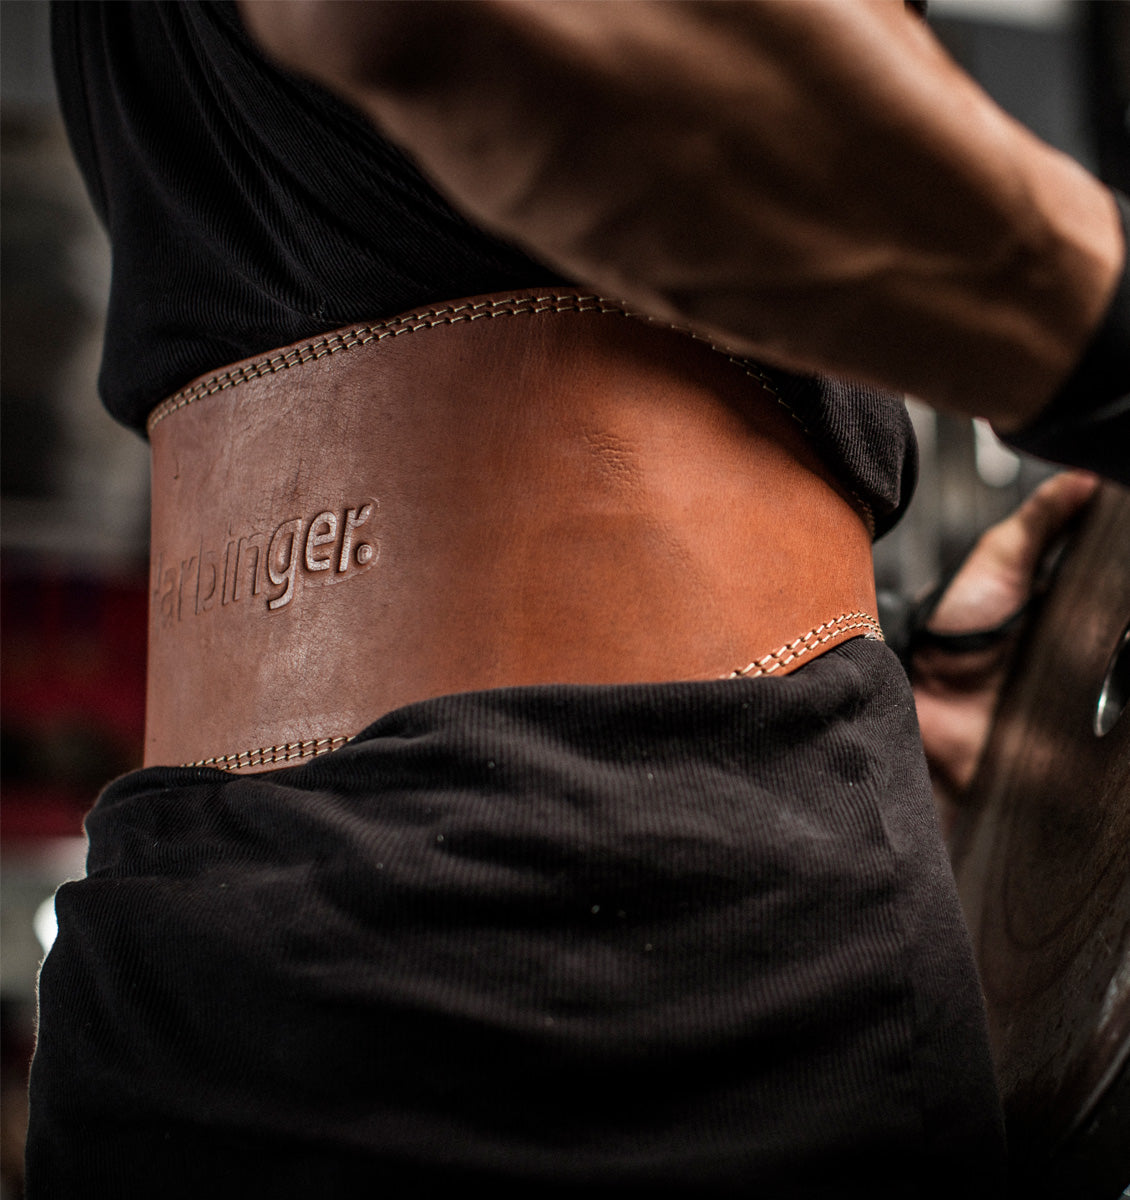 Harbinger 6 inch Oiled Leather Weight Lifting Belt - Lifestyle - 1